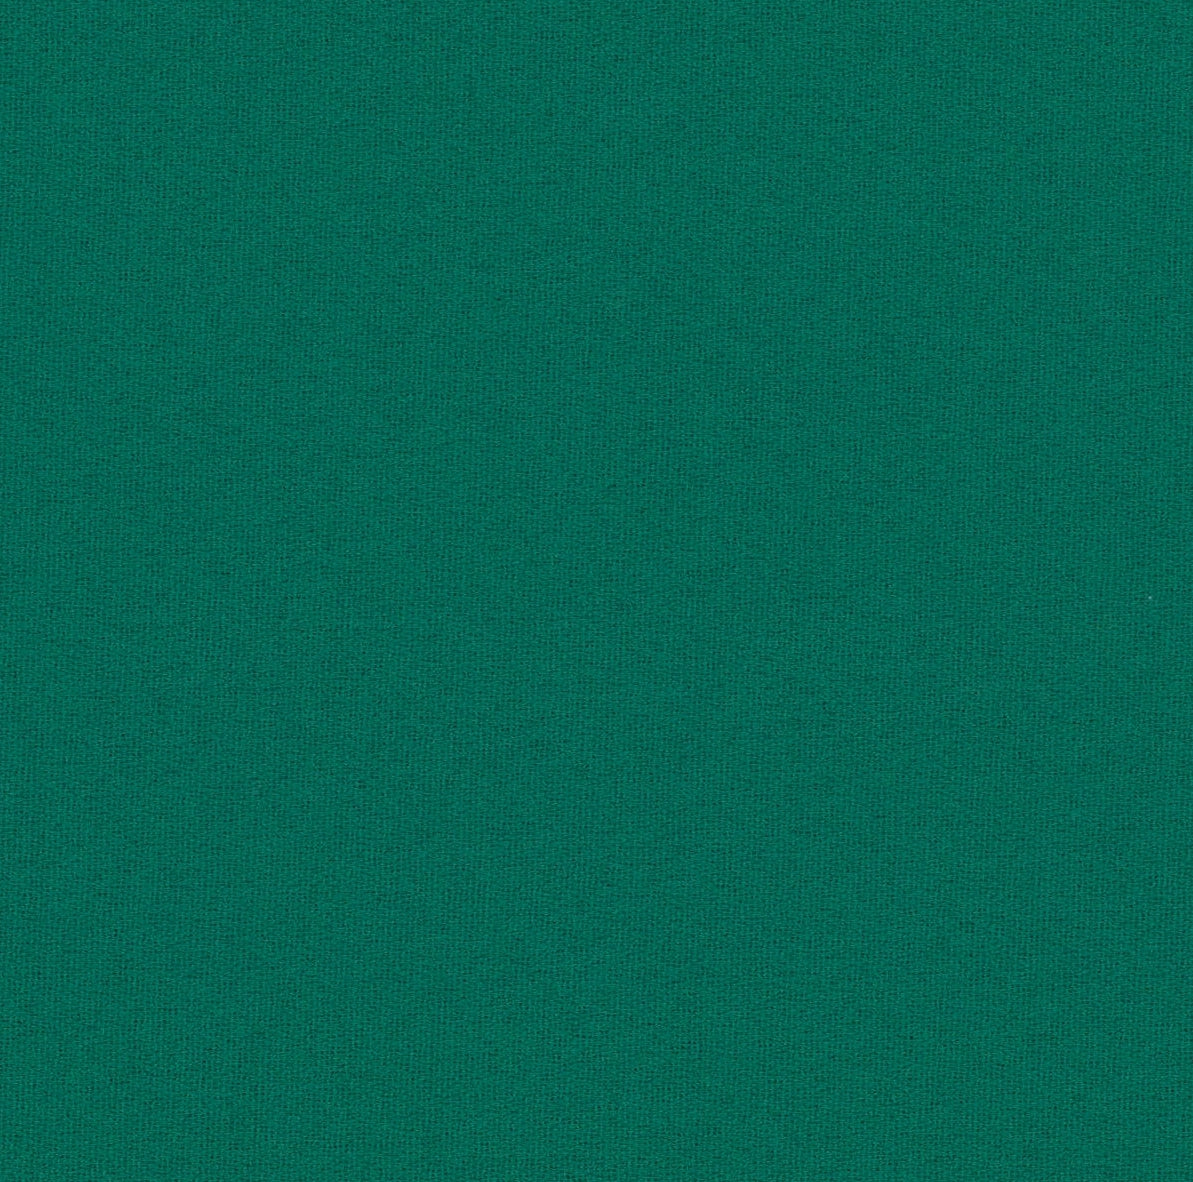 35001-04 Dark Spring Onion Crepe Plain Dyed Blend 315g/yd 54&quot; crepe green plain dyed polyester woven Solid Color - knit fabric - woven fabric - fabric company - fabric wholesale - fabric b2b - fabric factory - high quality fabric - hong kong fabric - fabric hk - acetate fabric - cotton fabric - linen fabric - metallic fabric - nylon fabric - polyester fabric - spandex fabric - chun wing hing - cwh hk - fabric worldwide ship - 針織布 - 梳織布 - 布料公司- 布料批發 - 香港布料 - 秦榮興